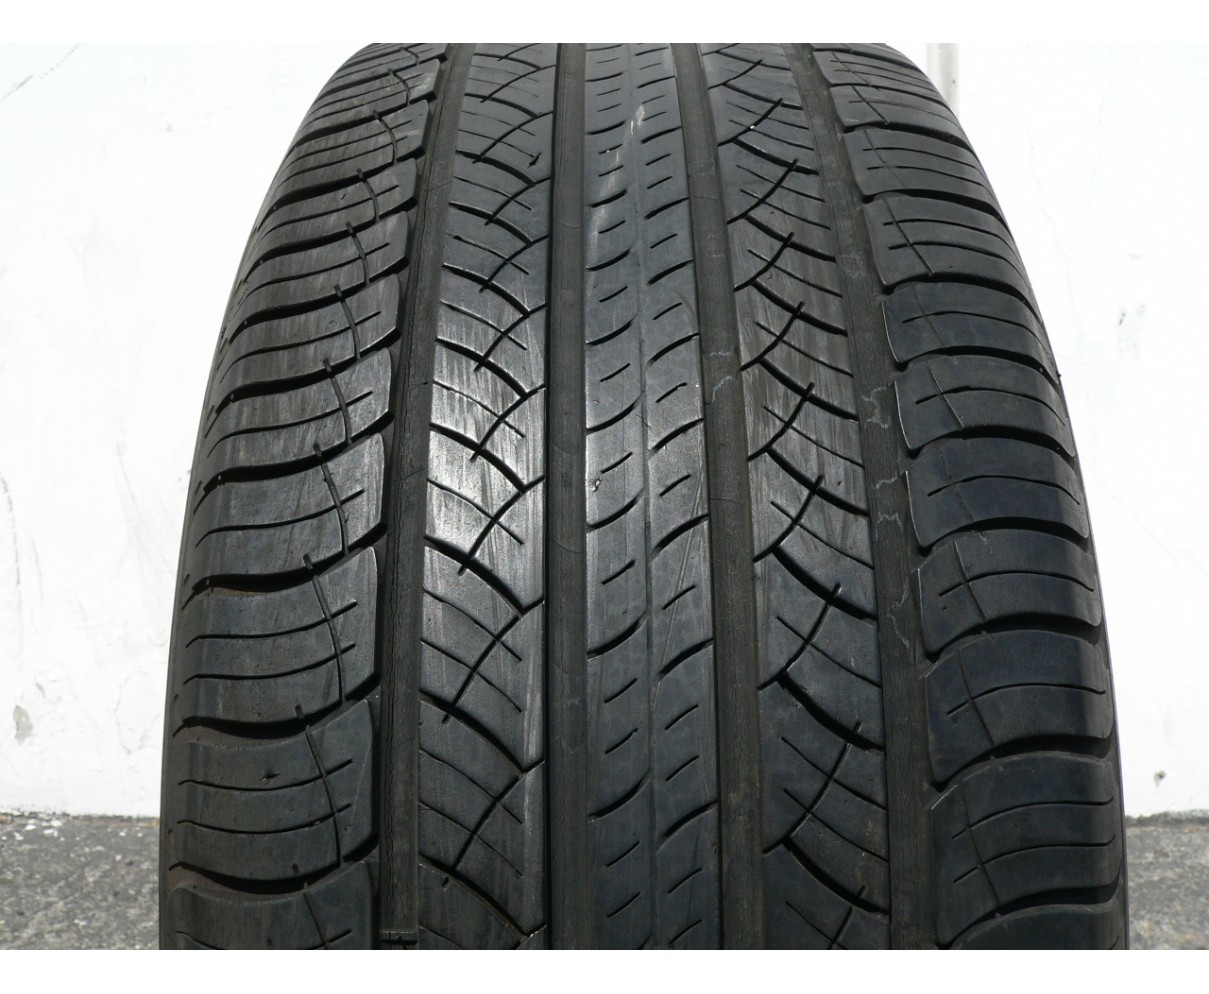 Tour Michelin HP 2 55 60% tires 255 18 105V life used Latitude